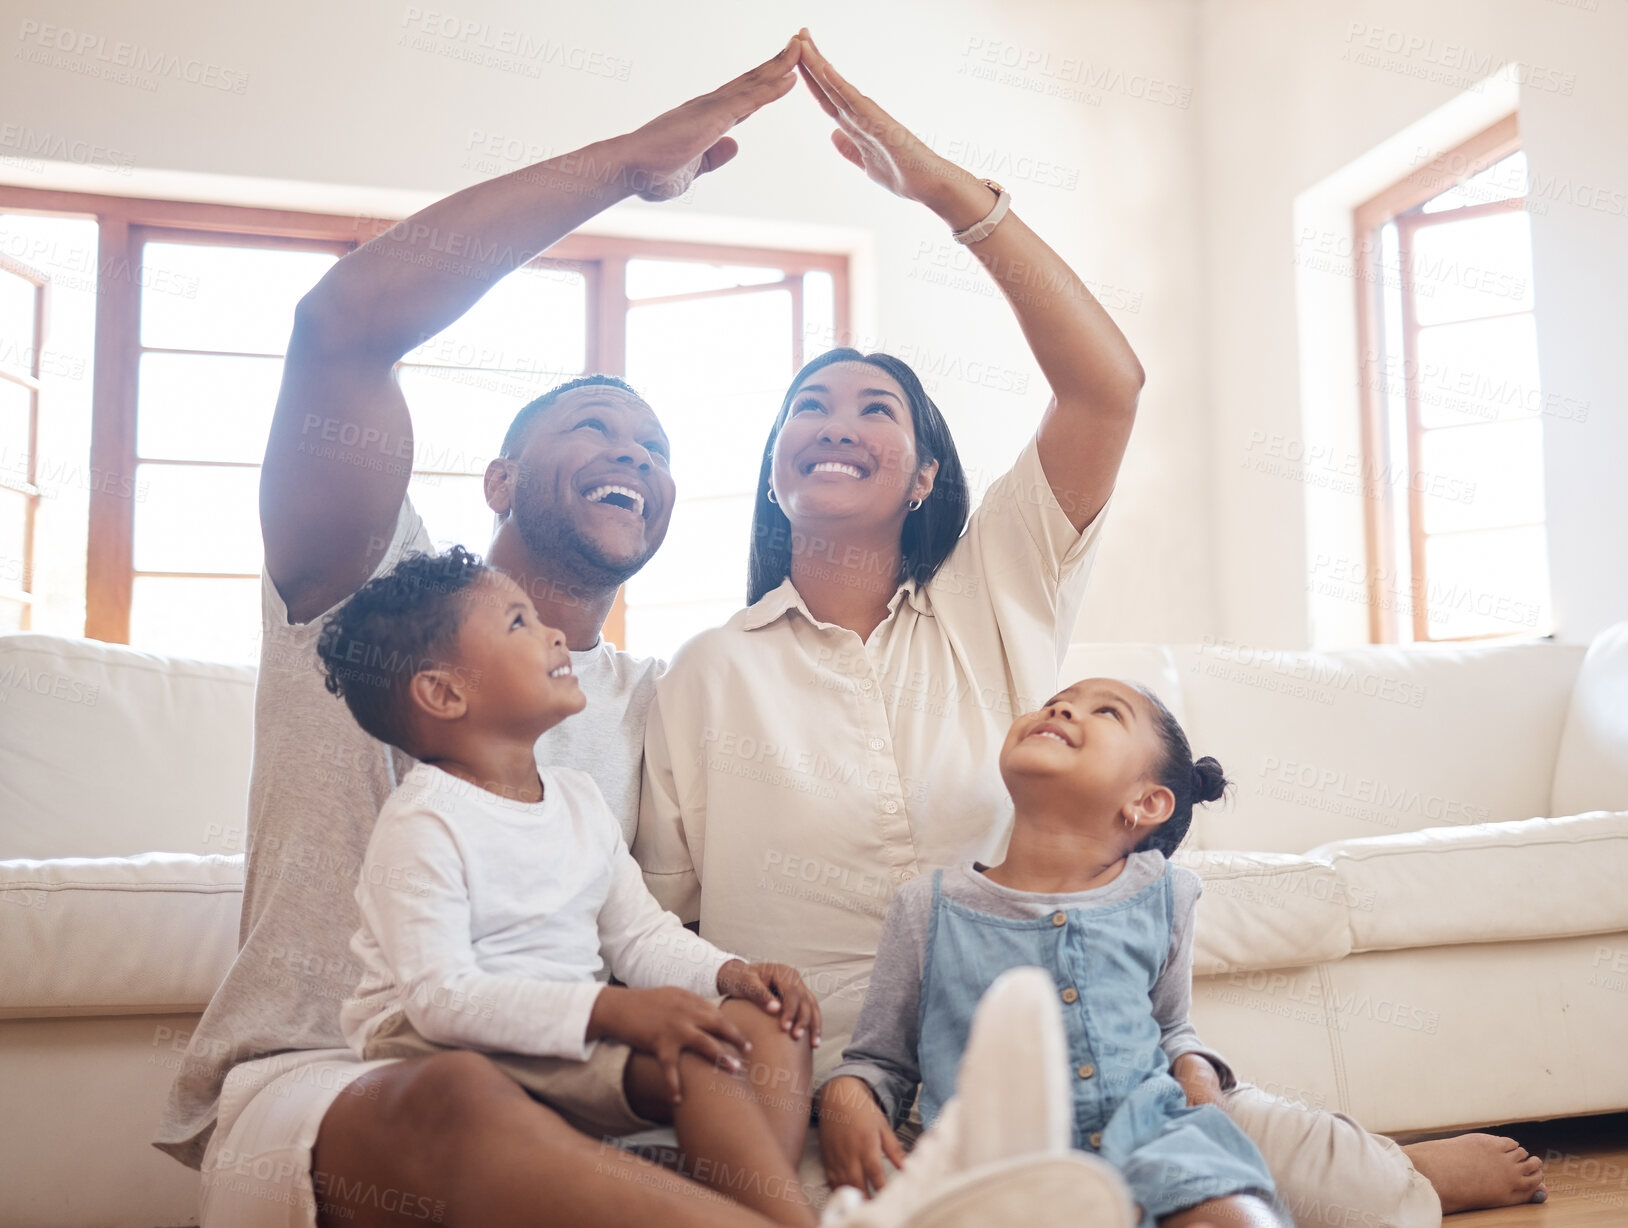 Buy stock photo Stylish mixed race parents with two kids sitting on floor, mom and dad making roof figure with hands arms over heads of adorable son and daughter inside their new house
